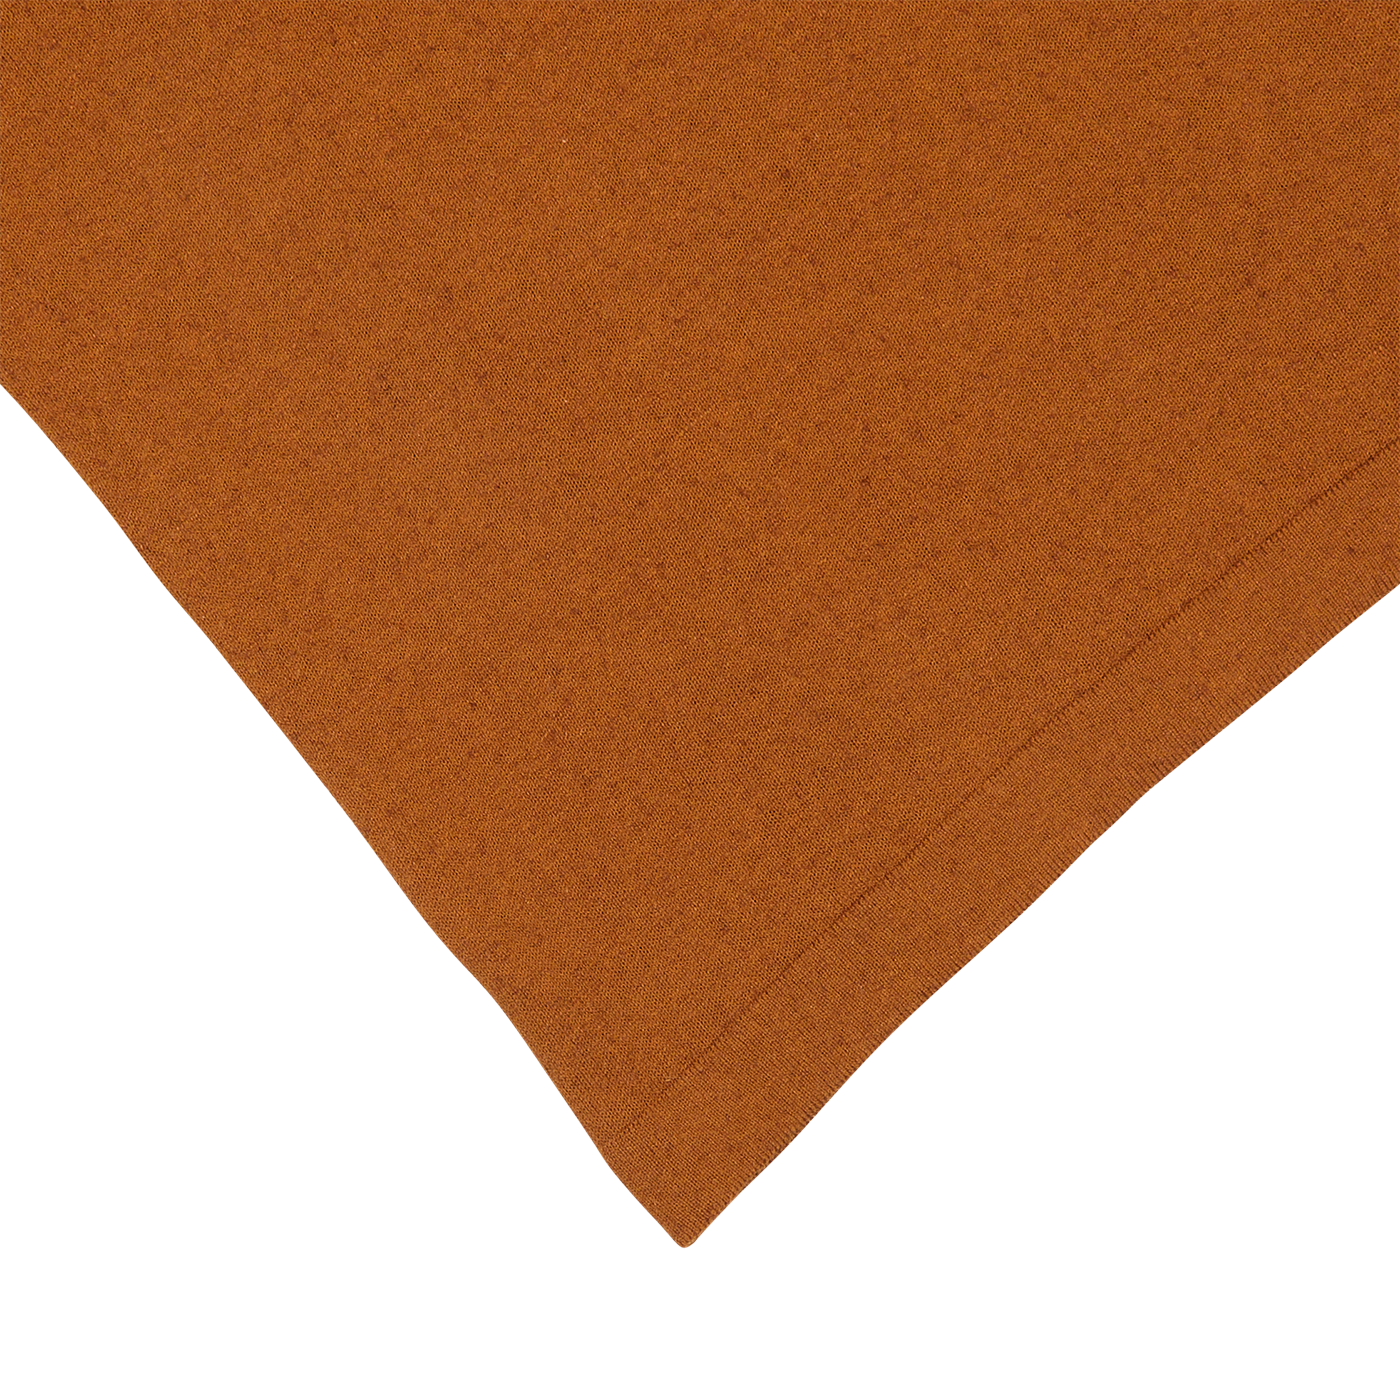 A brown felt pillow on a white background, resembling the texture of a G.R.P Tobacco Cotton Linen Polo Shirt.